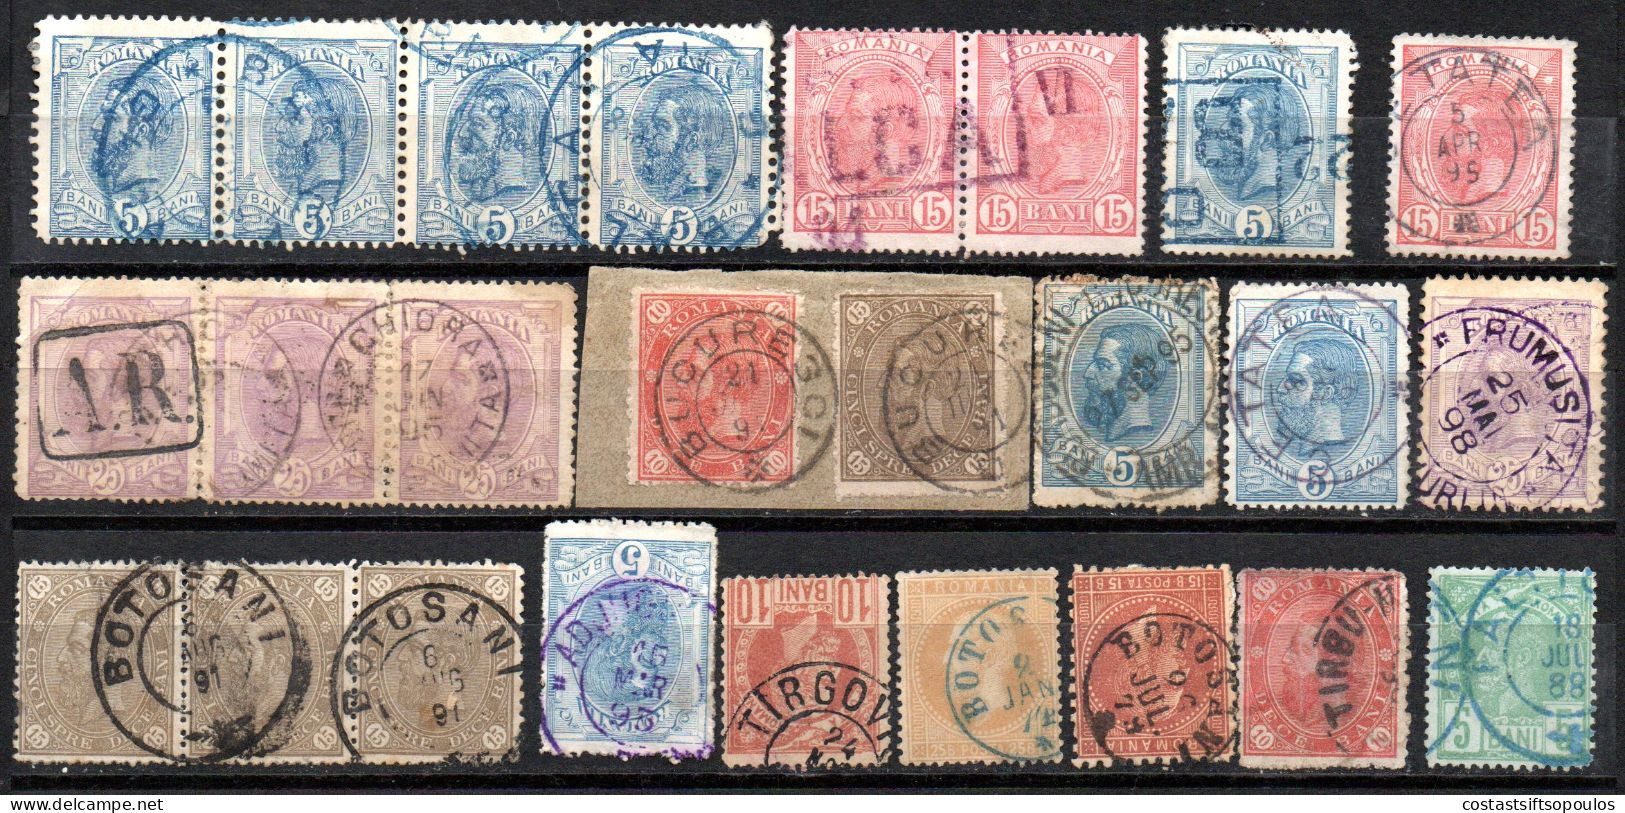 2670. ROMANIA CLASSIC STAMPS LOT, SOME INTERESTING POSTMARKS,FEW LIGHT FAULTS. - Gebraucht